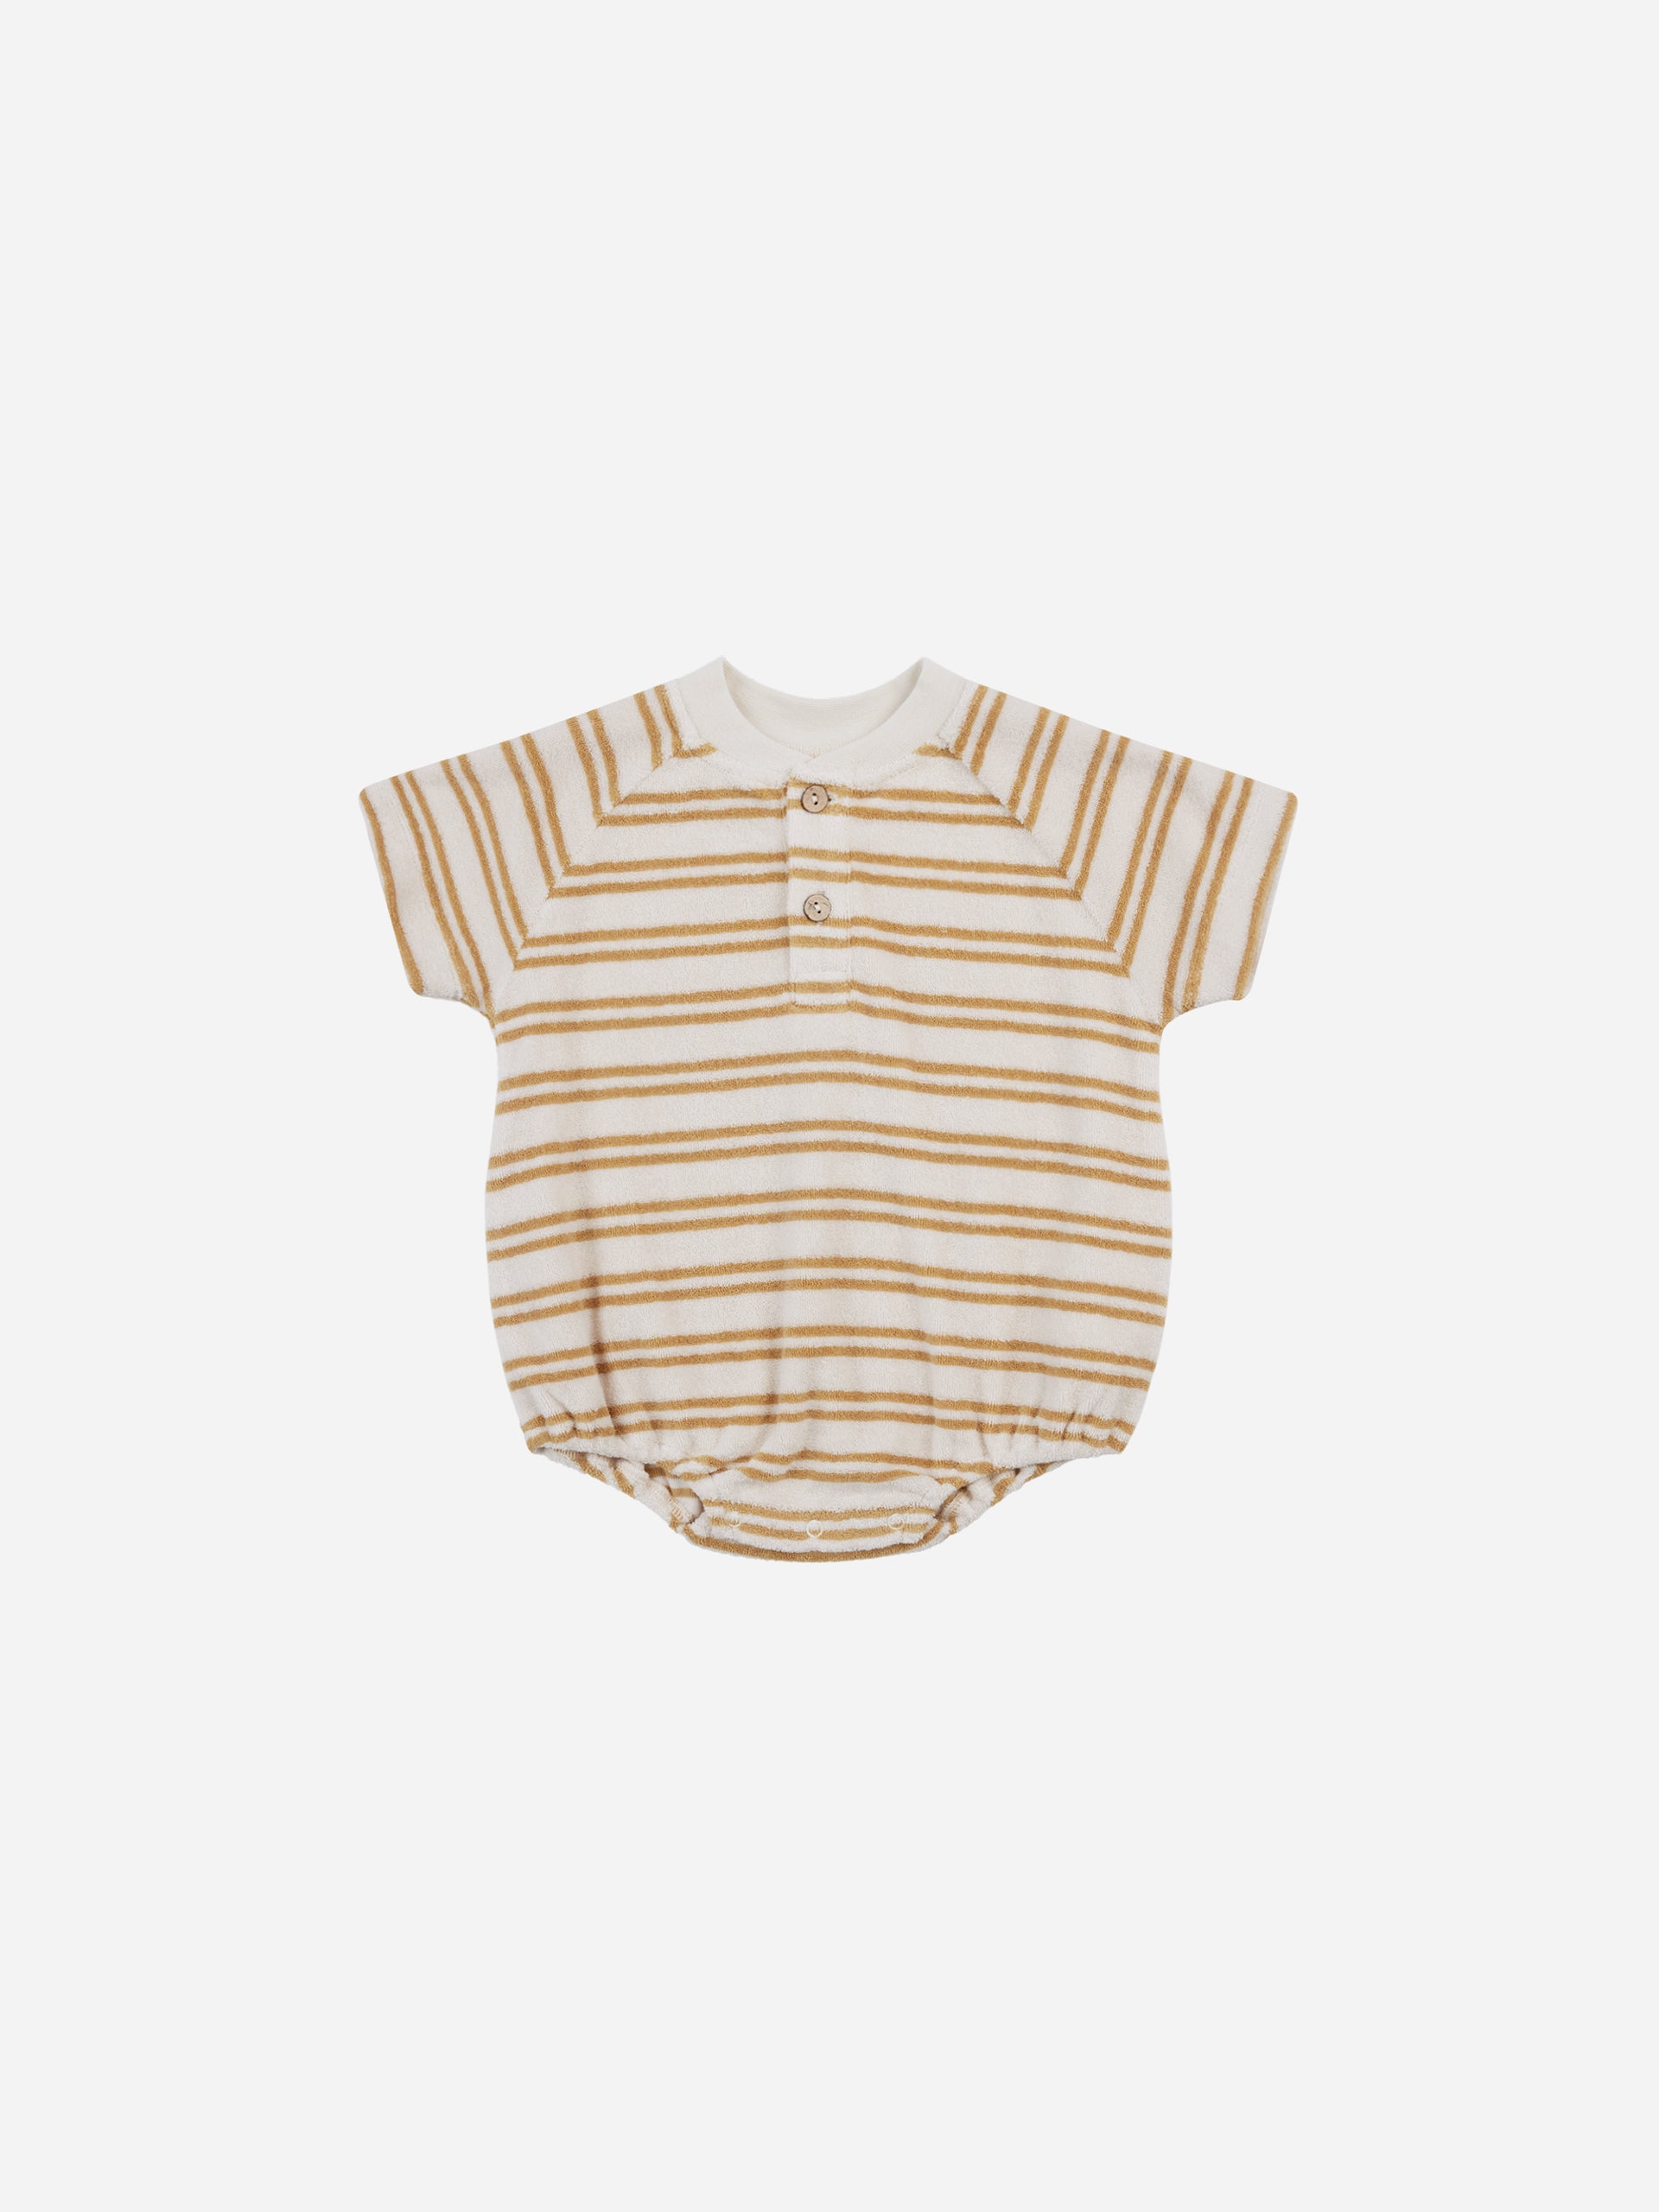 Terry Henley Romper || Honey Stripe - Rylee + Cru | Kids Clothes | Trendy Baby Clothes | Modern Infant Outfits |